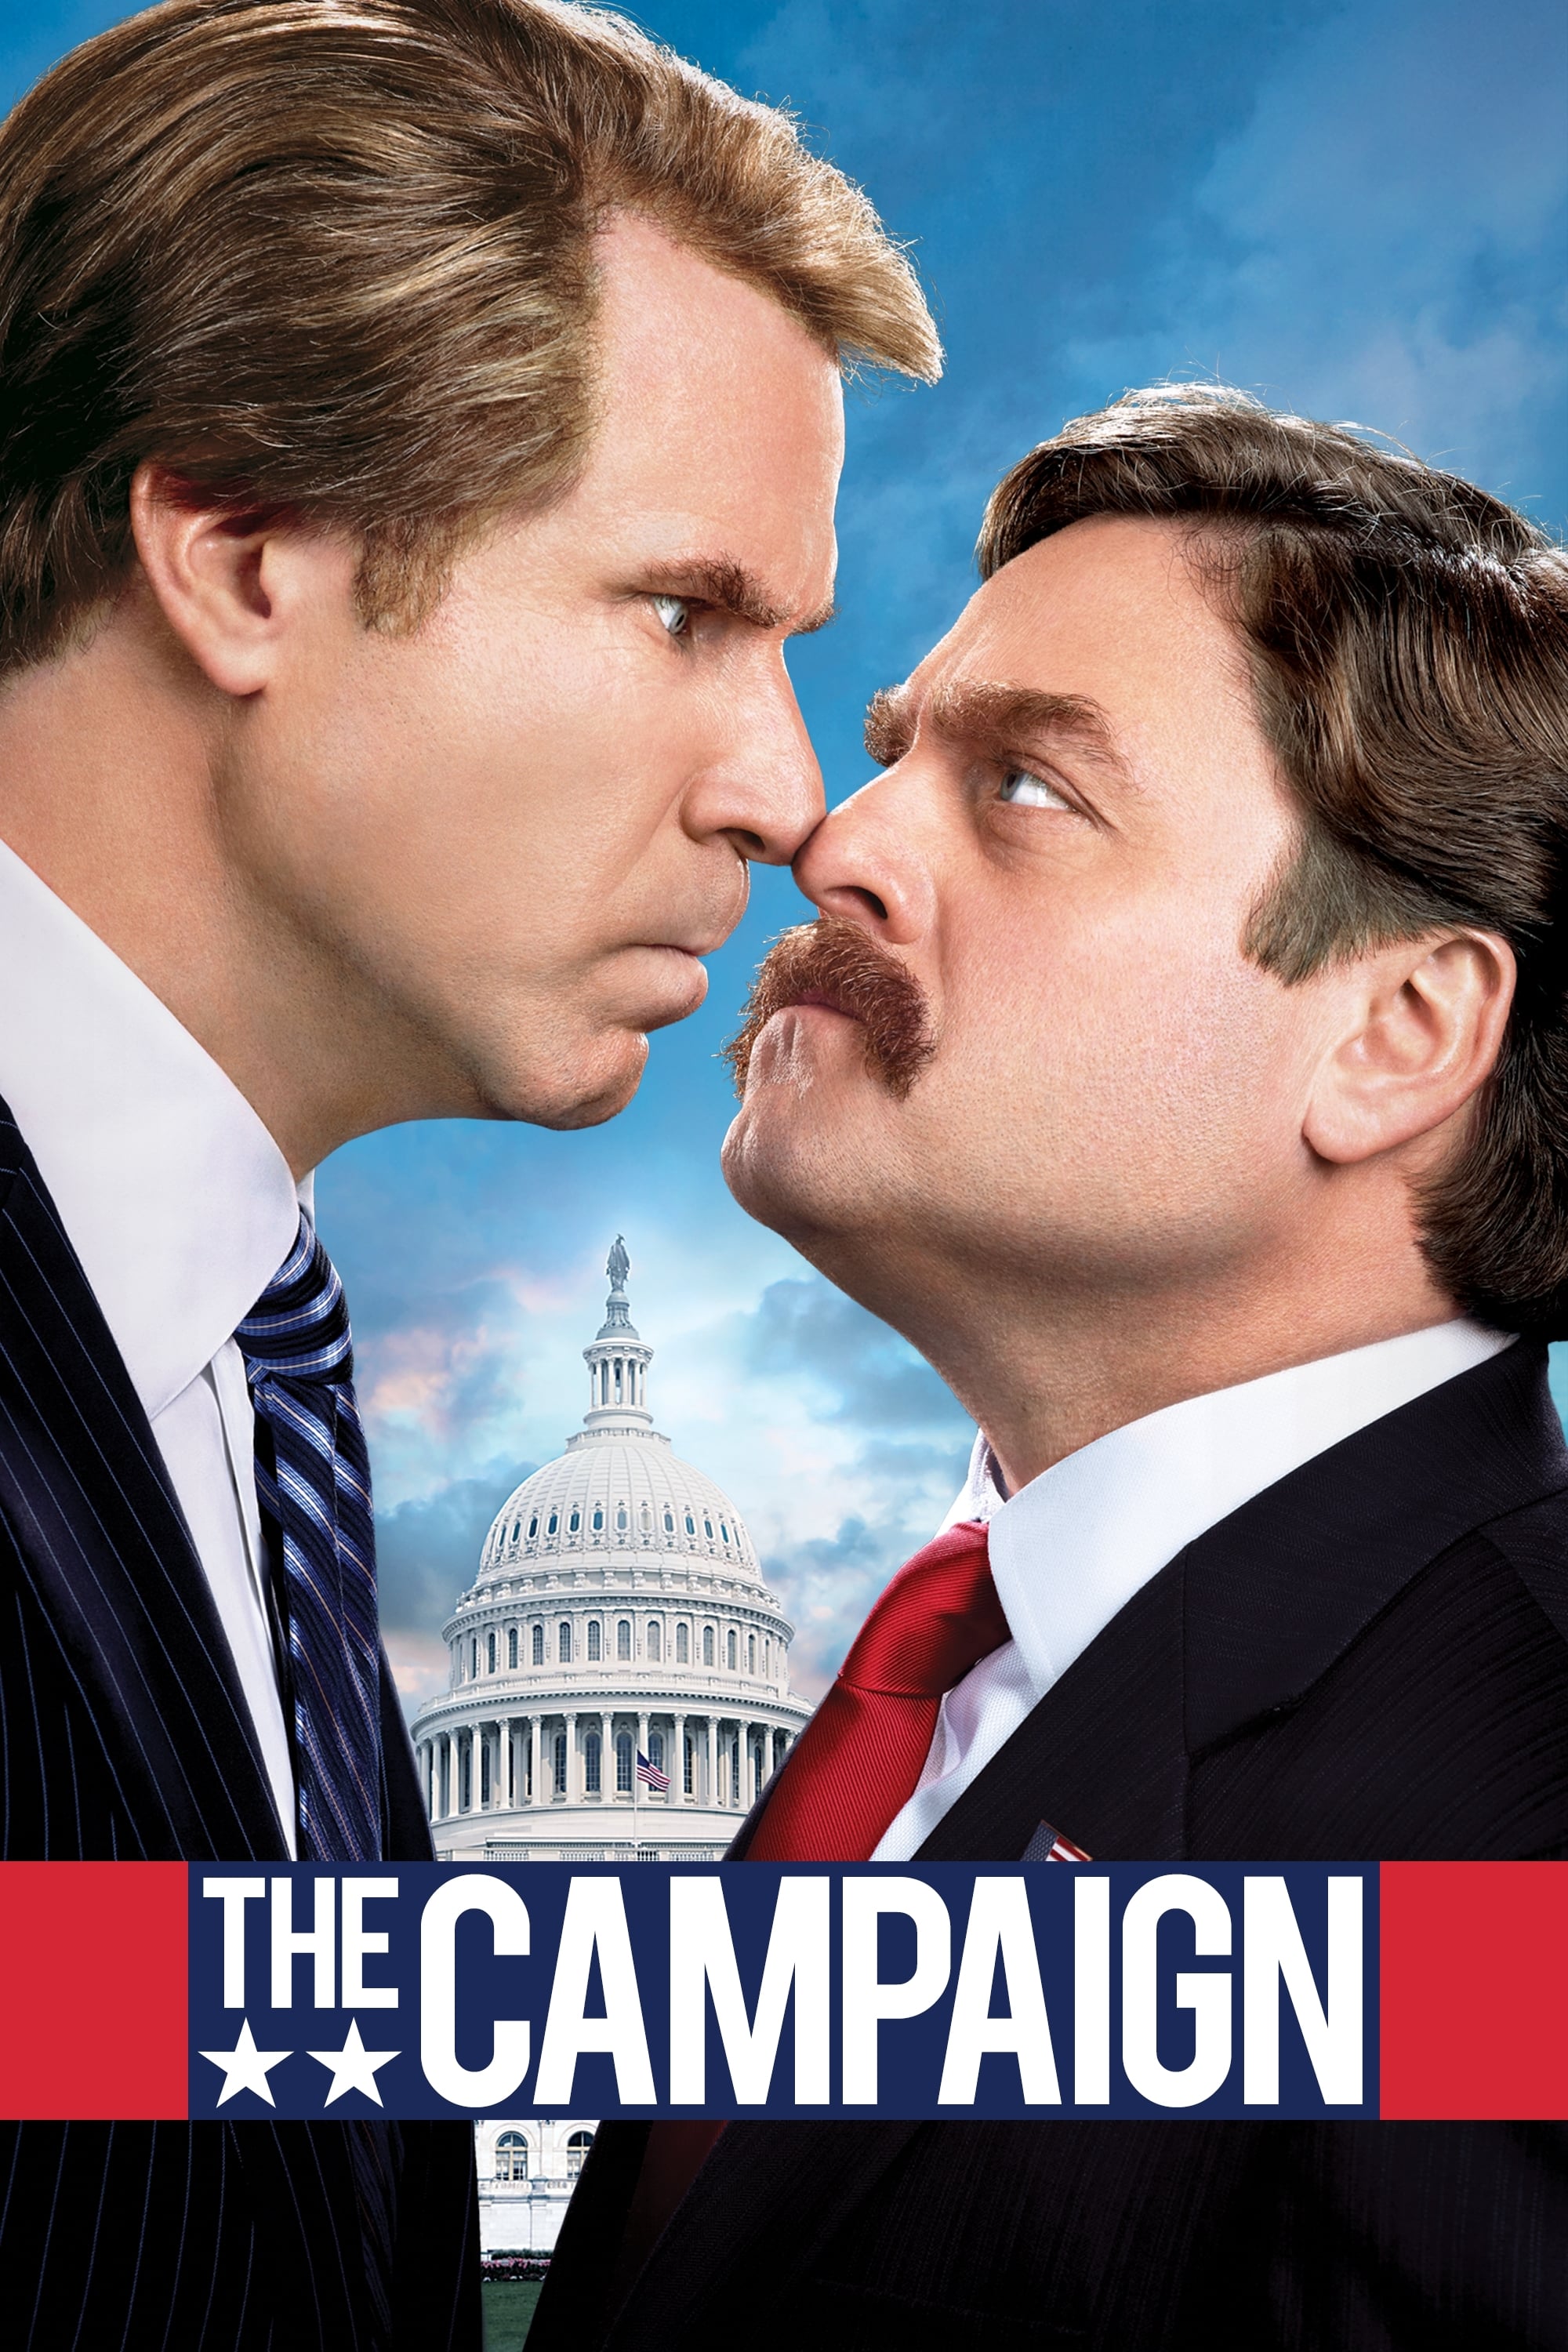 Chiến Dịch Bầu Cử - The Campaign (2012)